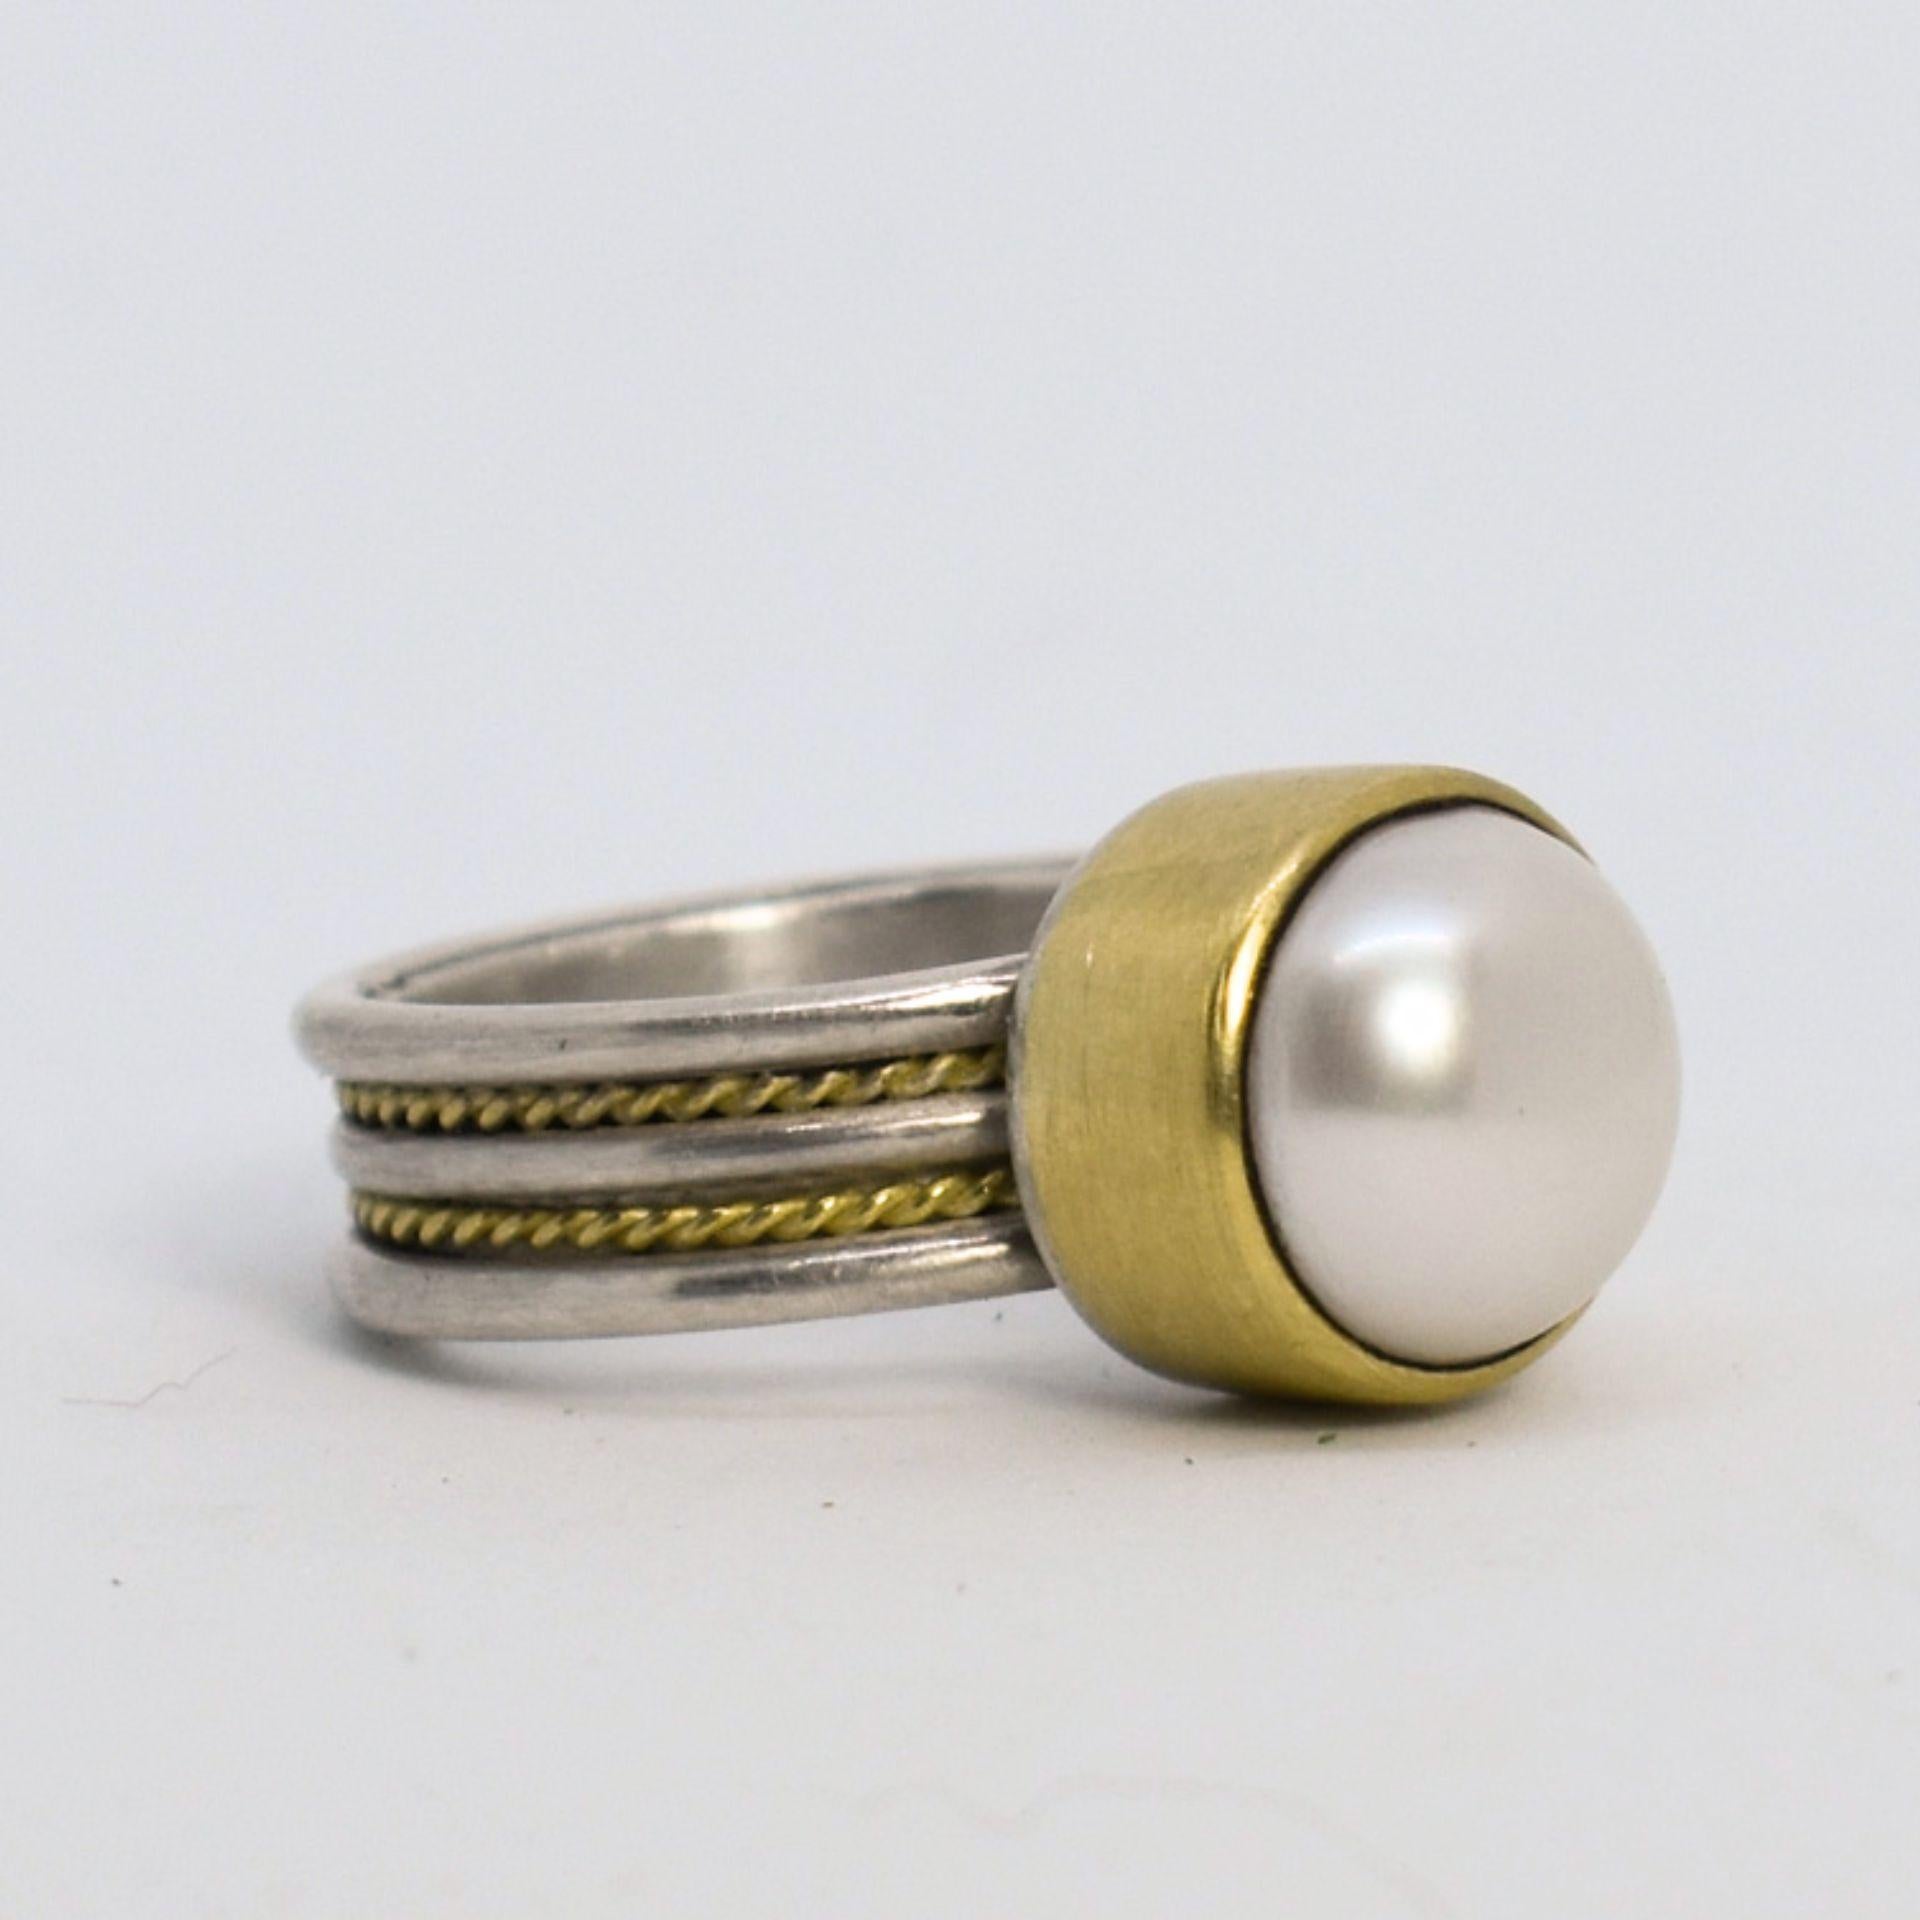 Elevate Your Style with the Exquisite Two-Tone Pearl Cocktail Ring by Lynn Kathyrn Miller - Lynn K Designs

Discover the perfect statement piece to enhance your wardrobe with the luxurious Two-Tone Pearl Cocktail Ring, expertly handcrafted by